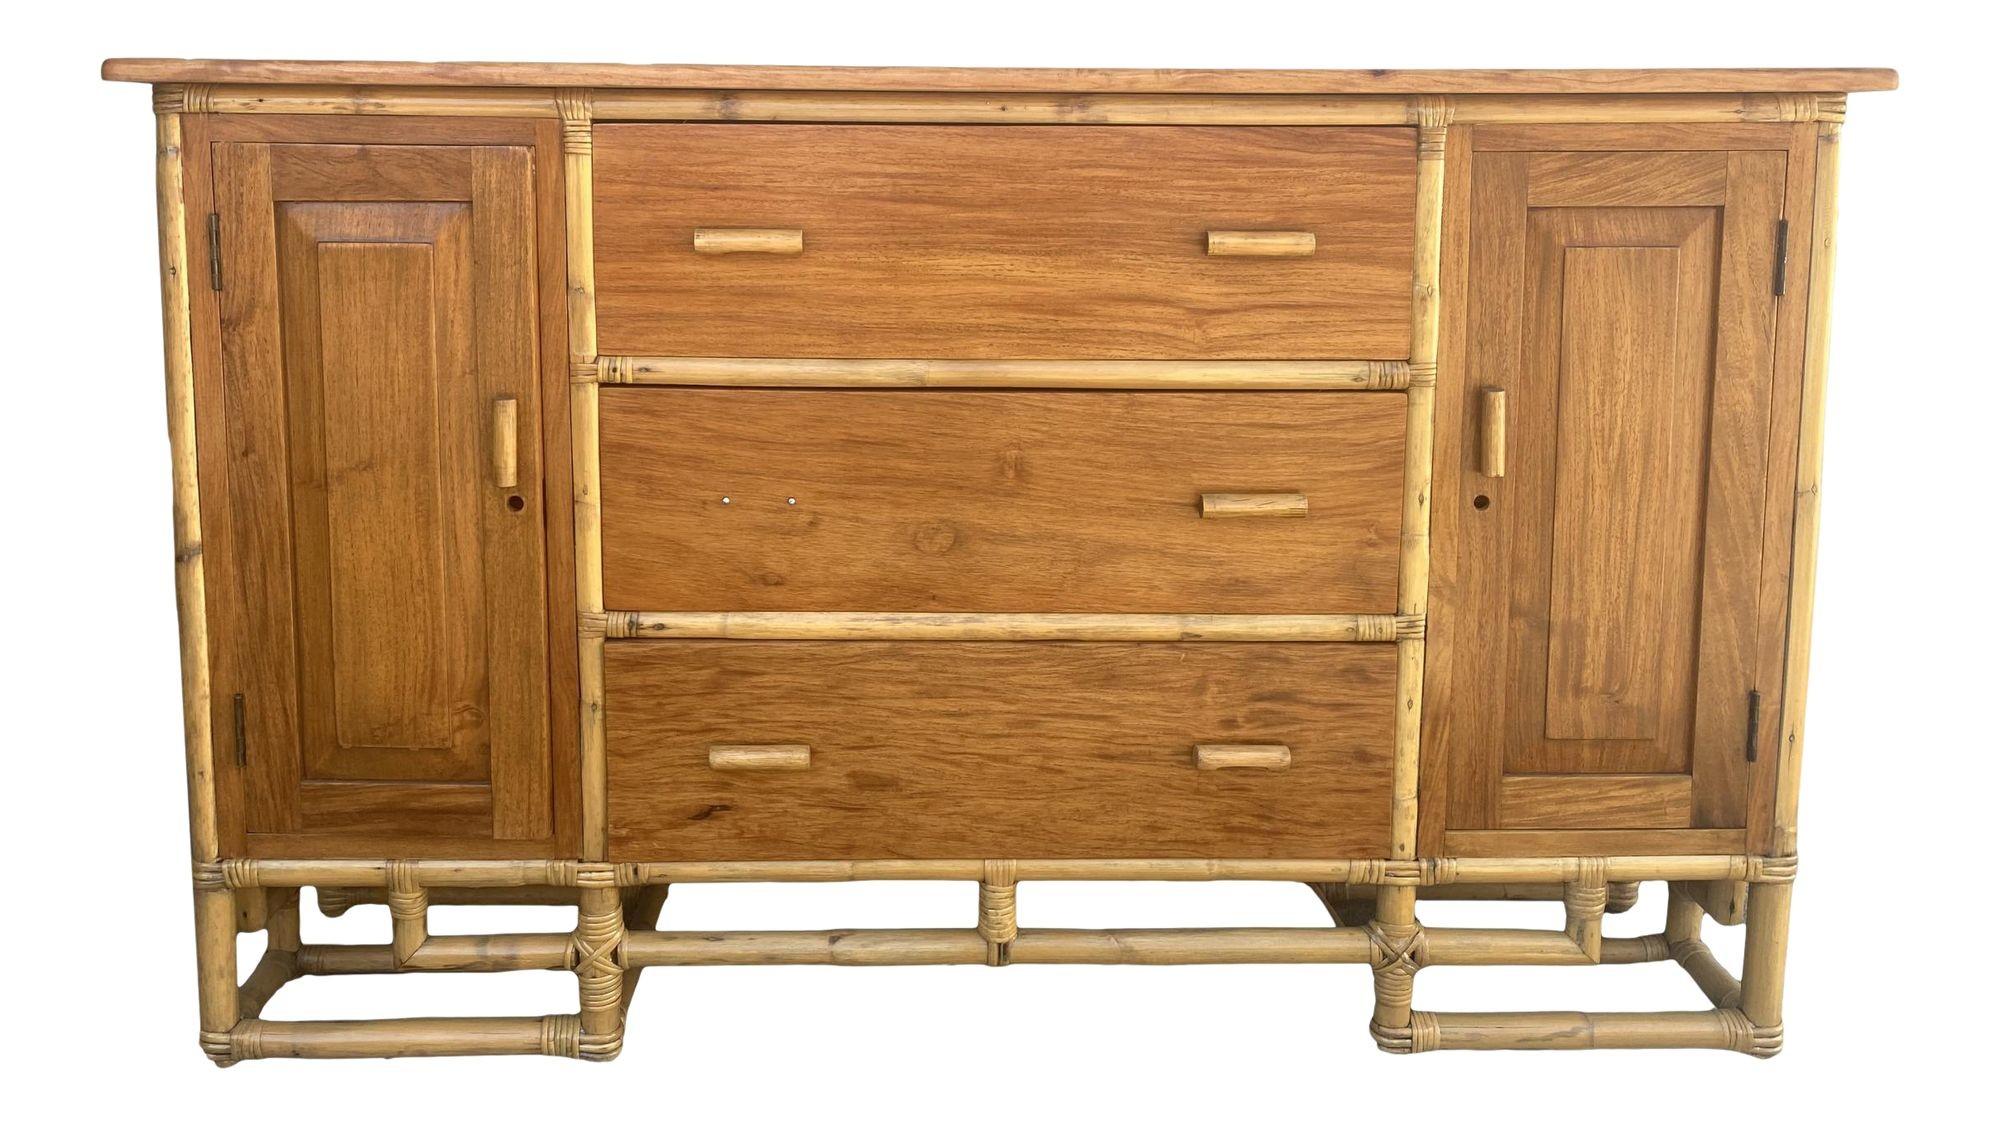 Paul Frank designed a Vertically stacked rattan sideboard with a mahogany top resting on an Asian-inspired base. It contains three pull-out drawers and two side cabinets with a fixed shelf in each.

1950, United States
The 1950s restored Paul Frankl